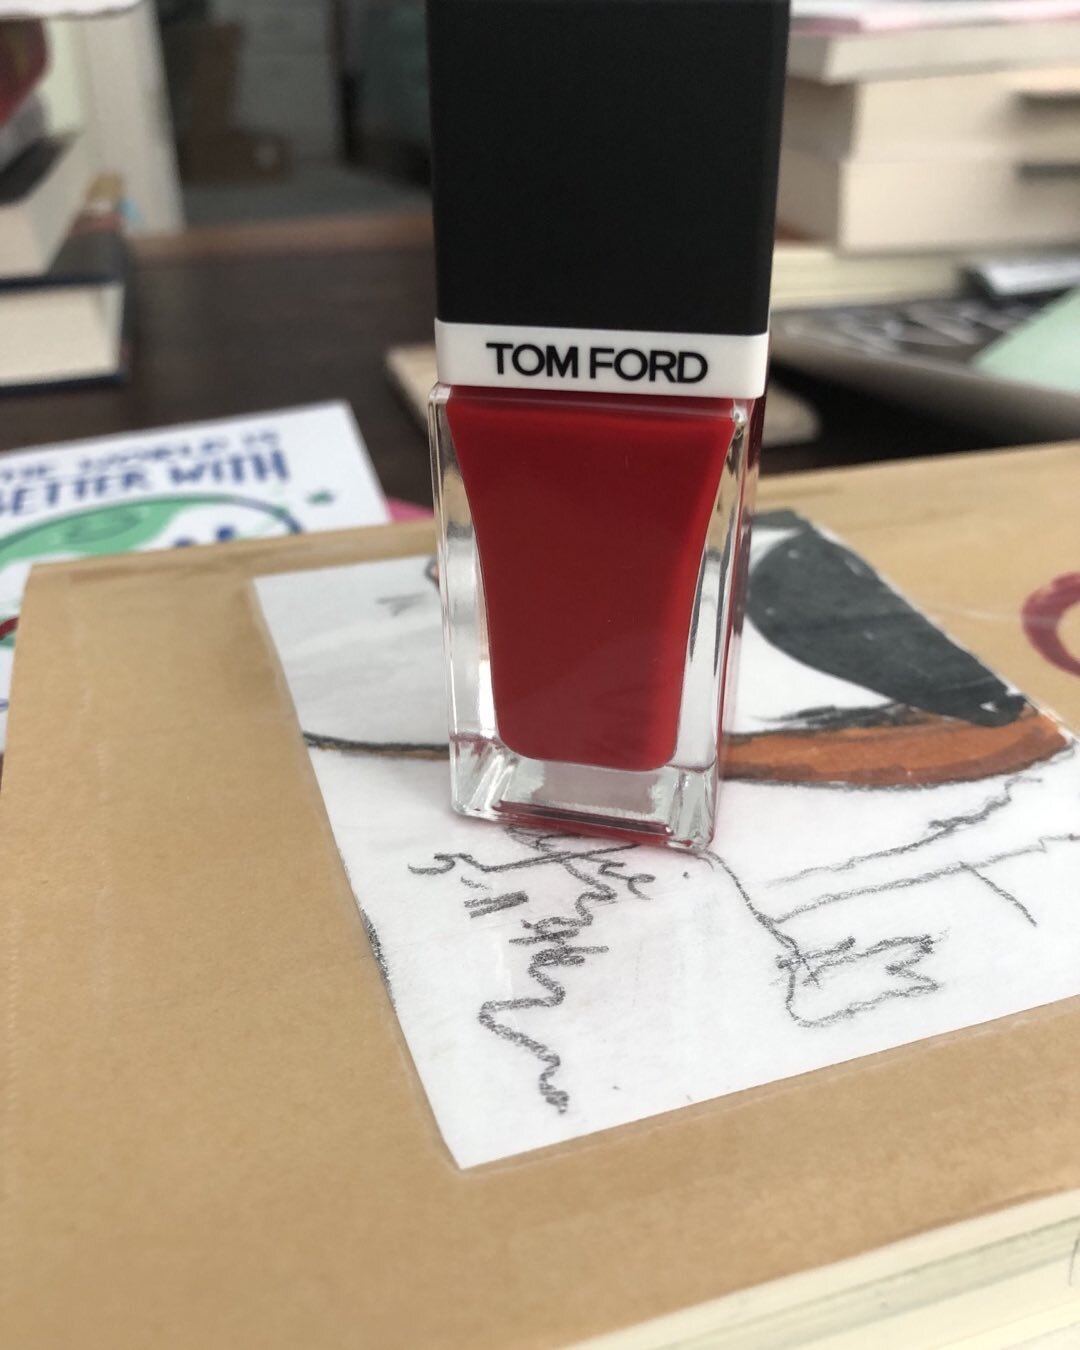 When it&rsquo;s your 78th birthday and you receive a bottle of Tom Ford&rsquo;s red nail polish called Fucking Fabulous, the day is off to a good start. #tomford #fuckingfabulous